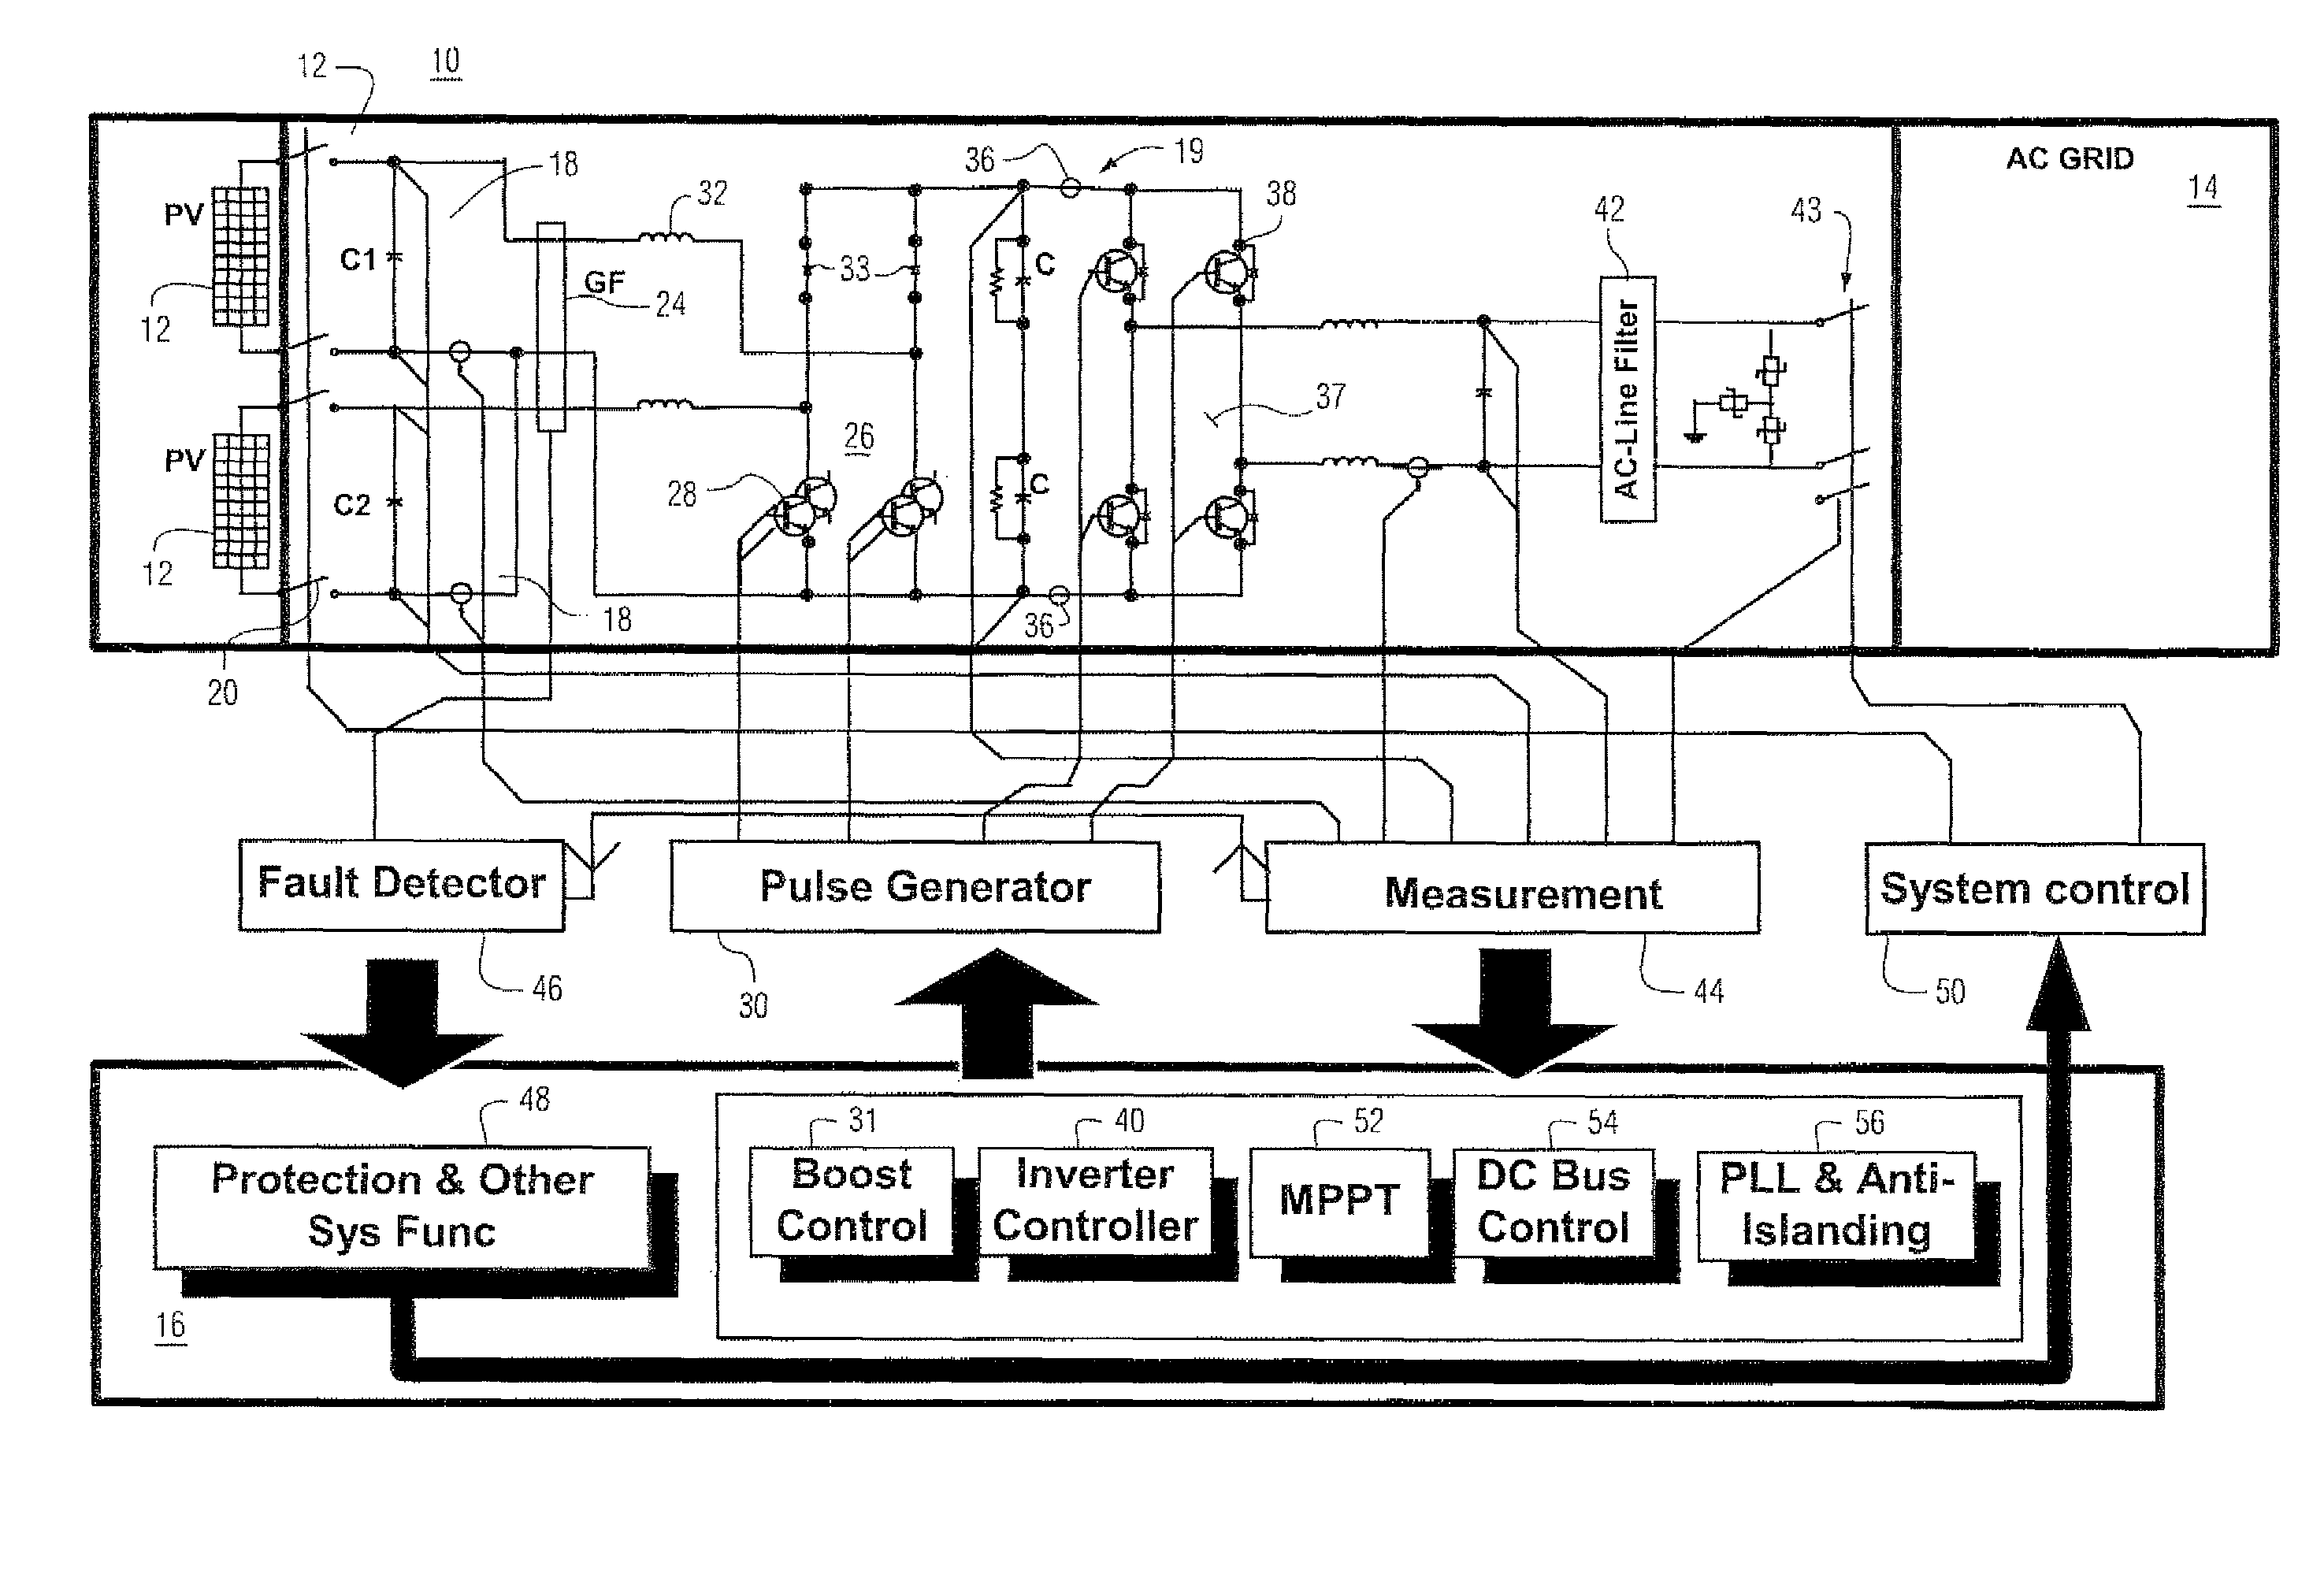 Method and system to convert direct current (DC) to alternating current (AC) using a photovoltaic inverter